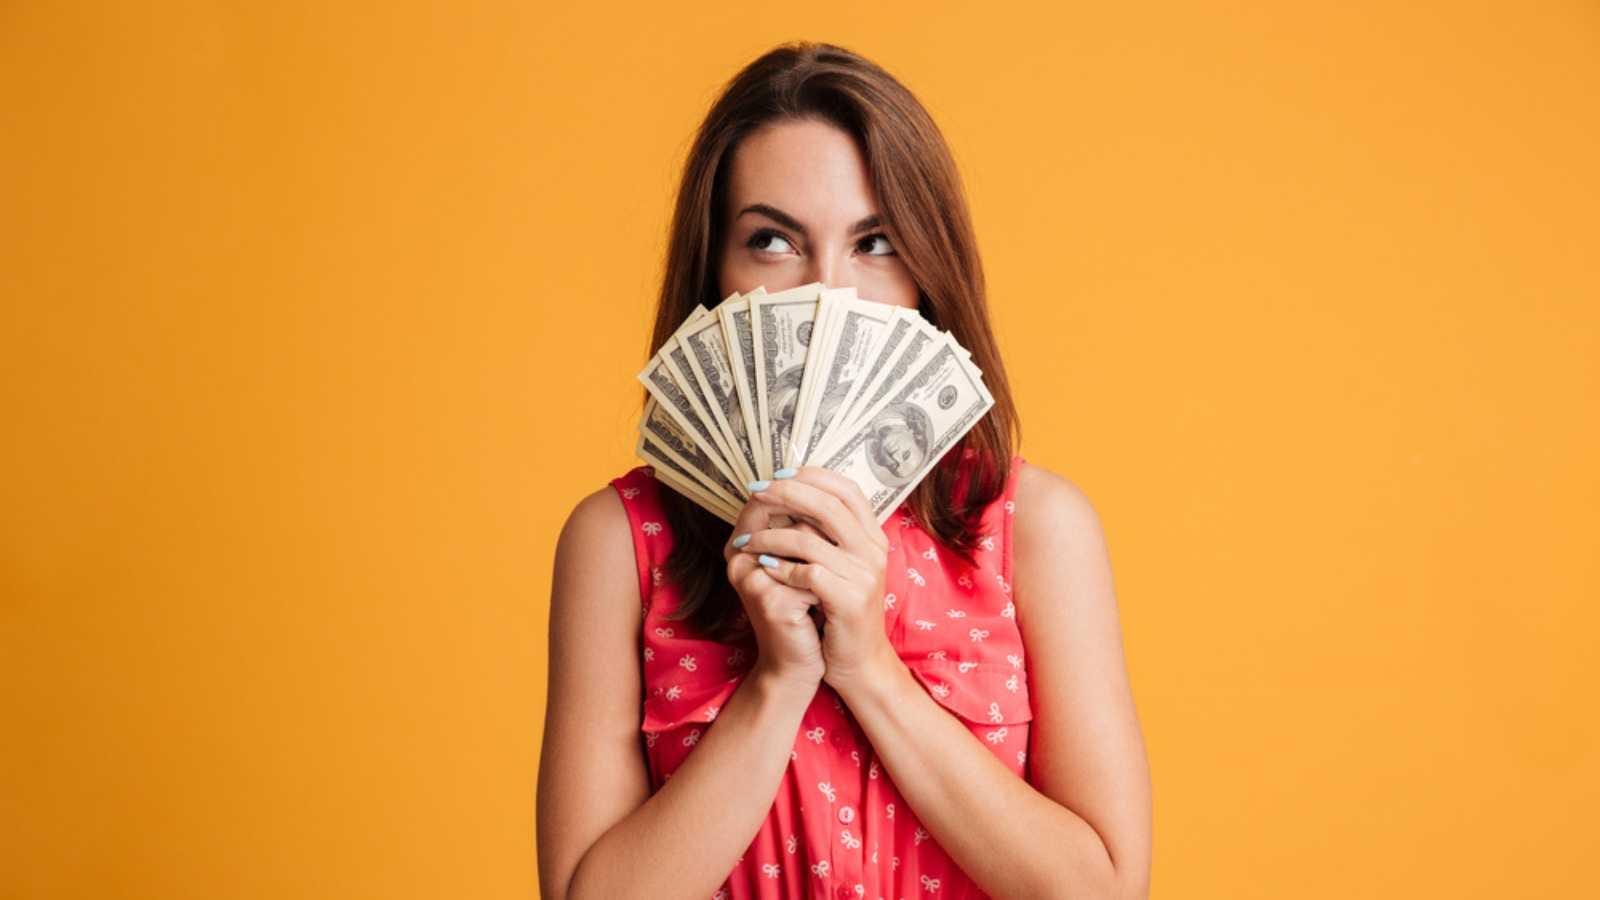 Girl with cash